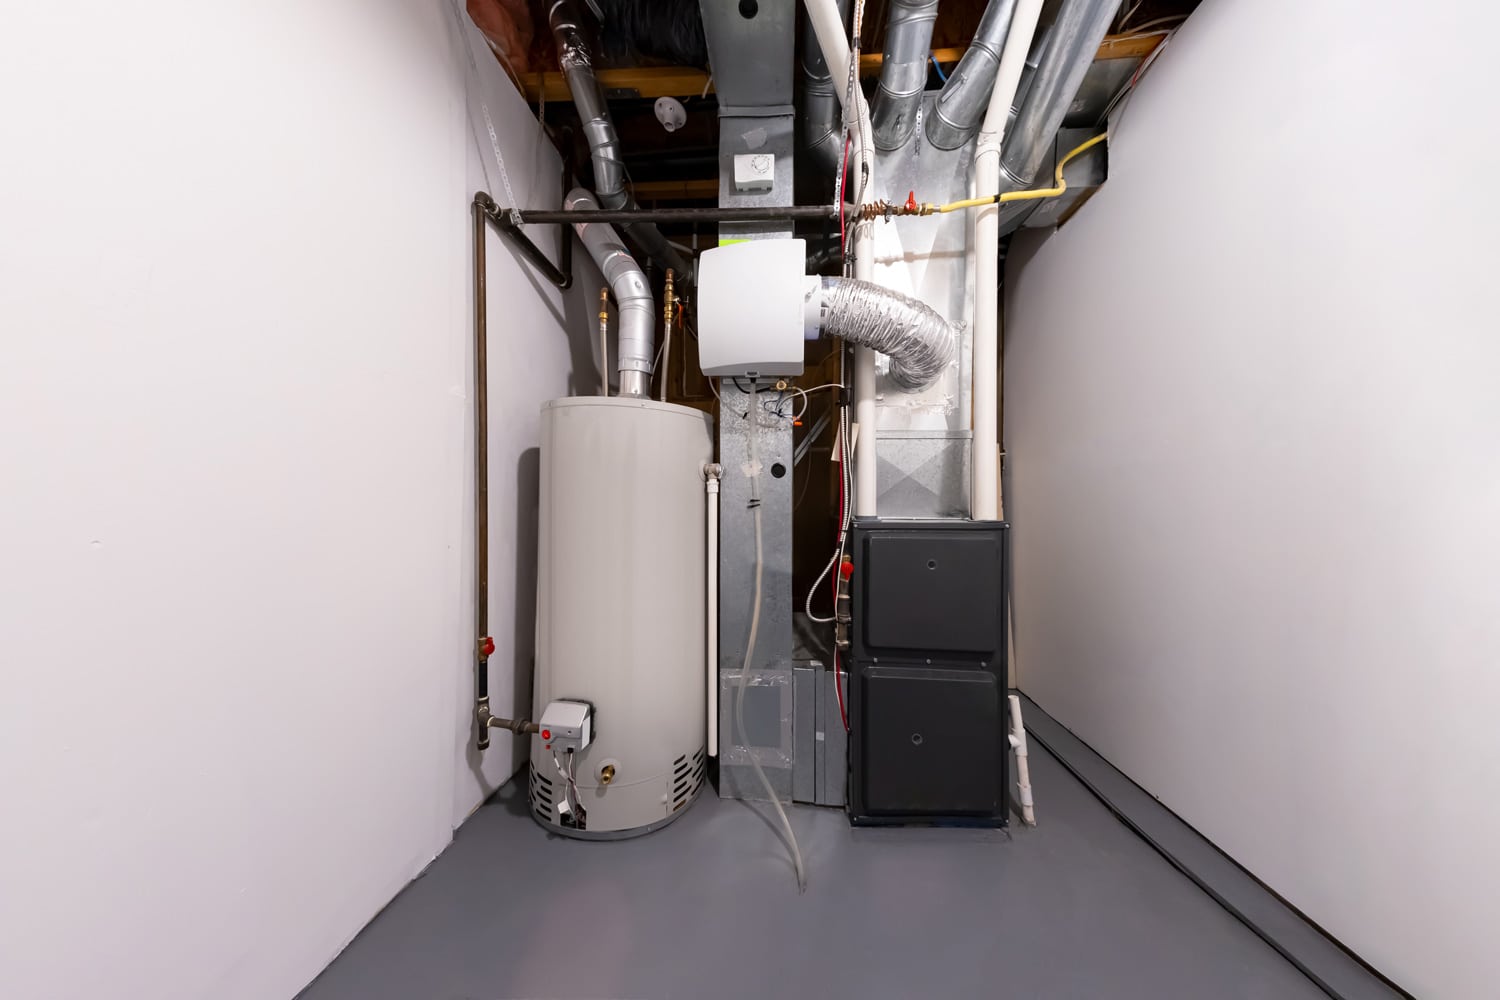 A home high efficiency furnace. Furnace Dual Stage Electronically Commutated Motors